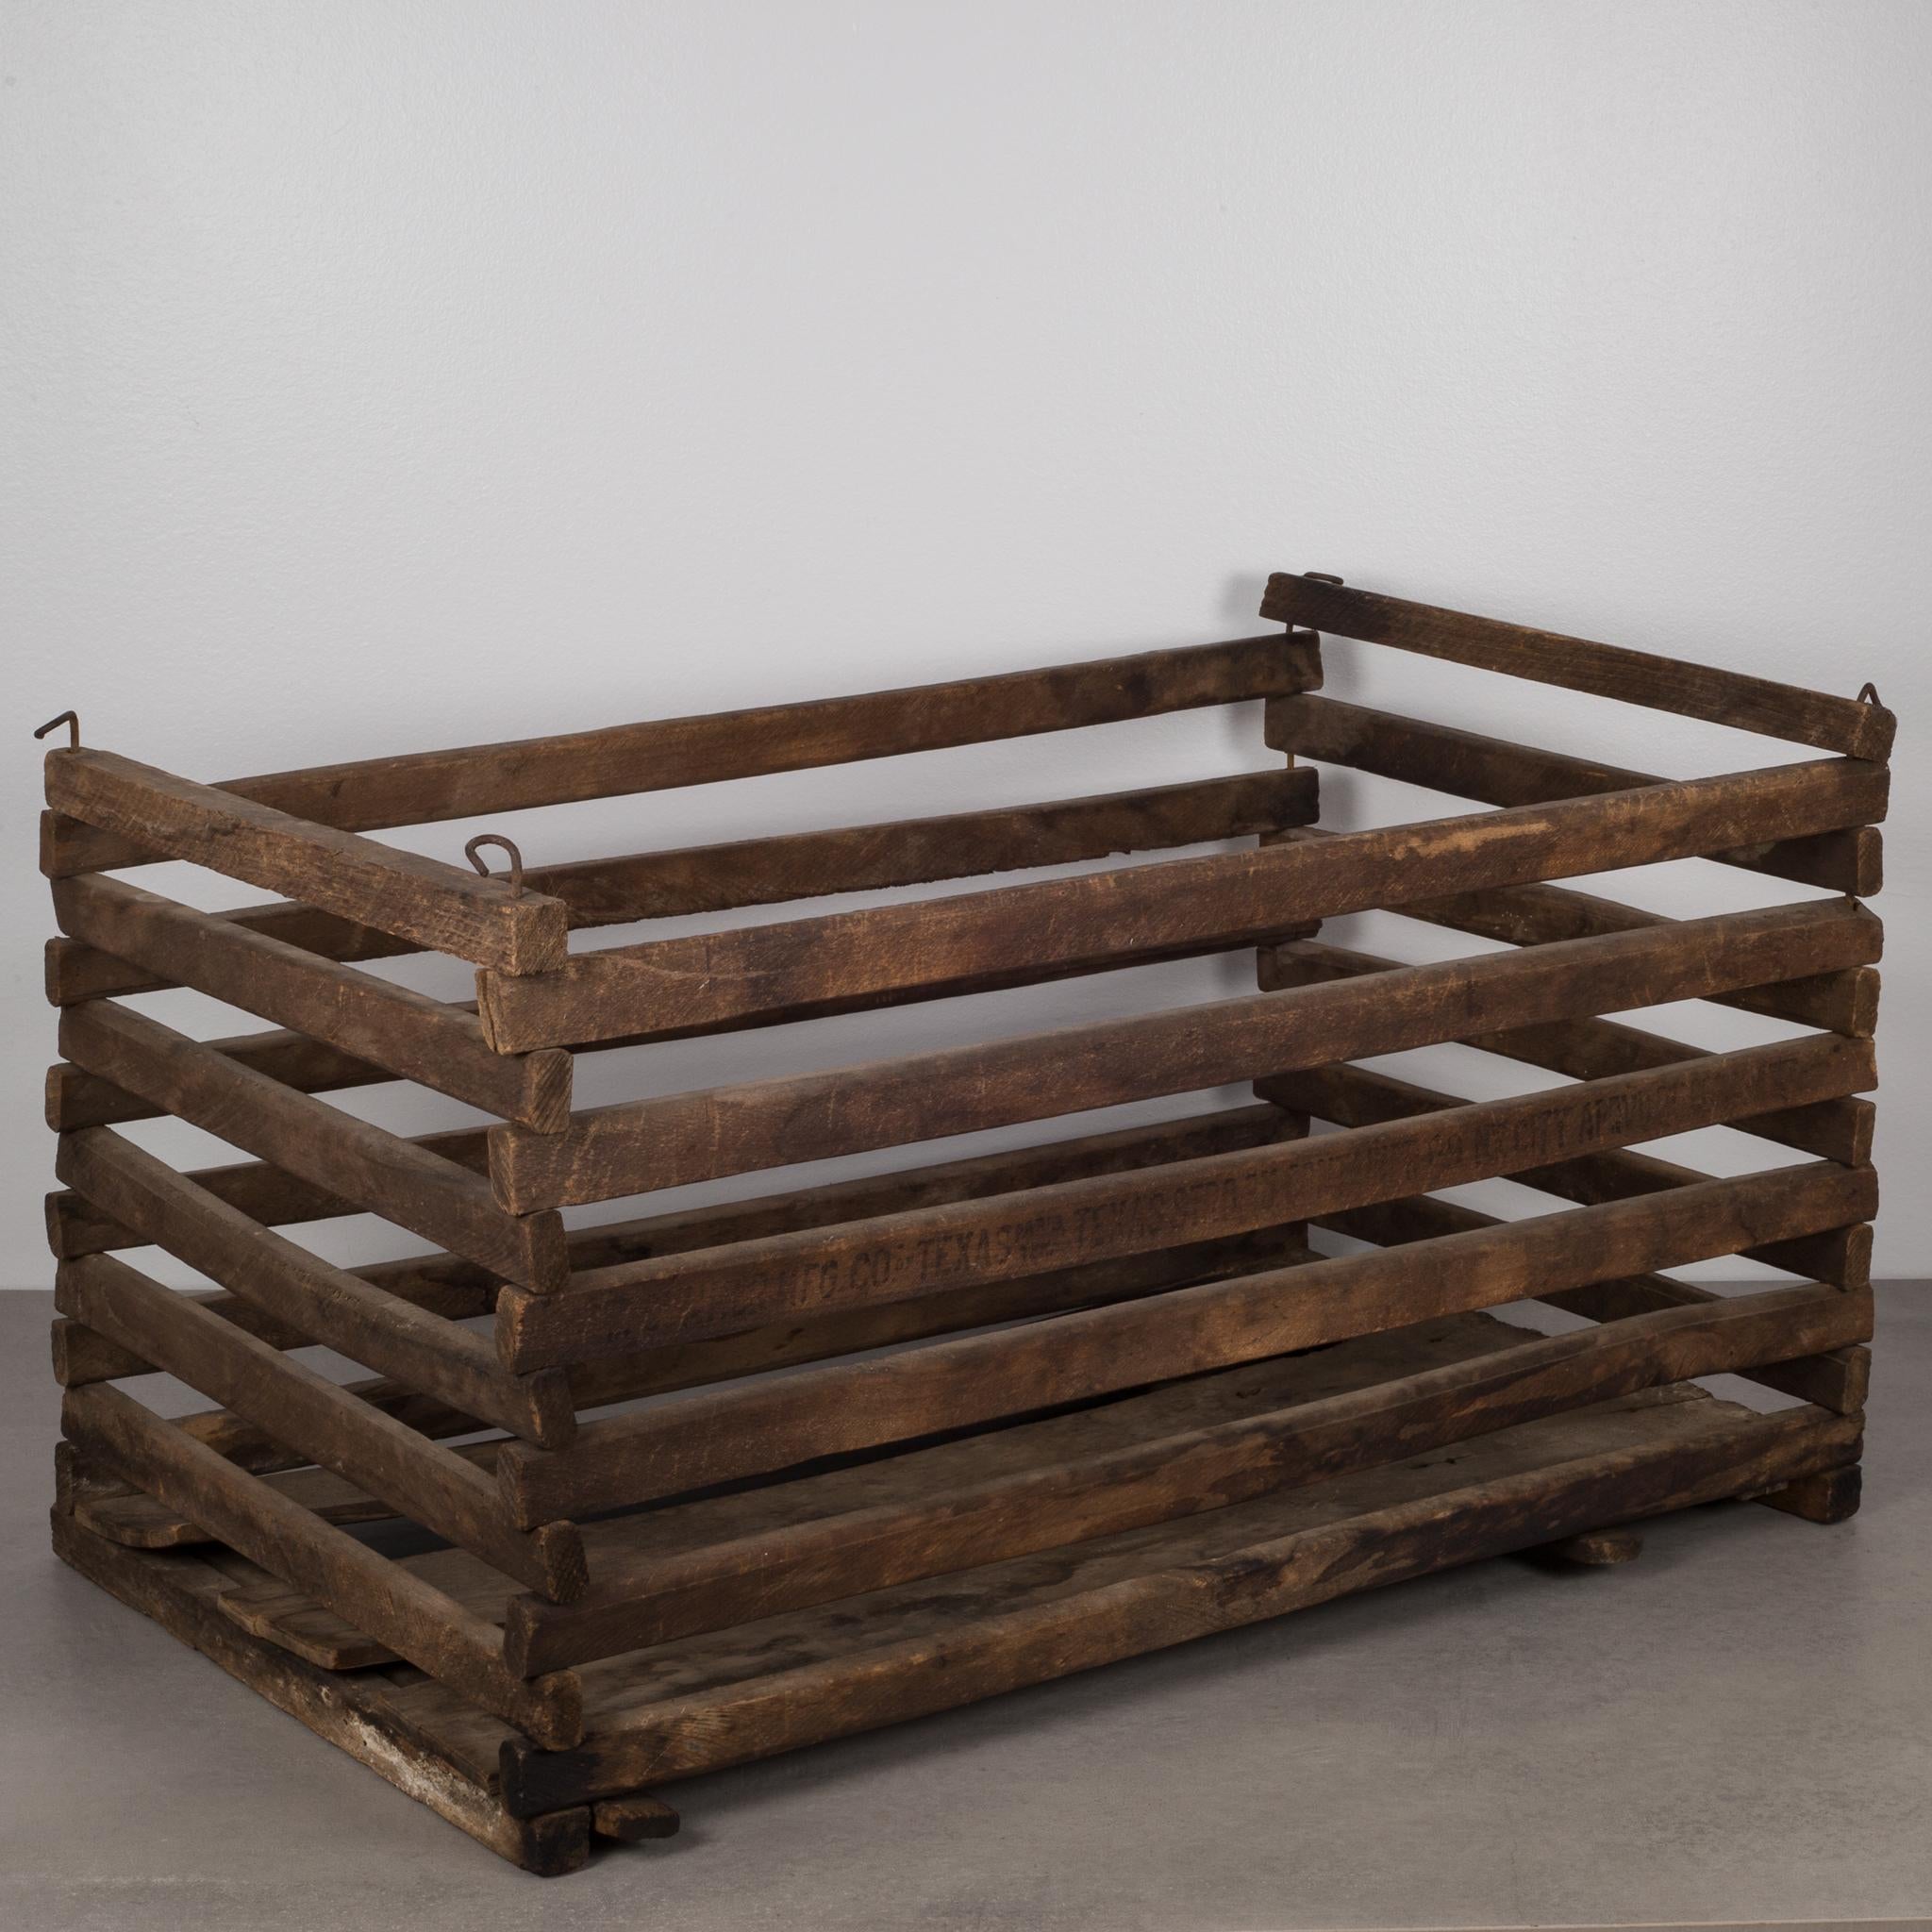 Slated wooden crate designed to collapse after use for better storage. Used to transport chickens and other poultry. The bottom panel pulls out and the main body collapses.